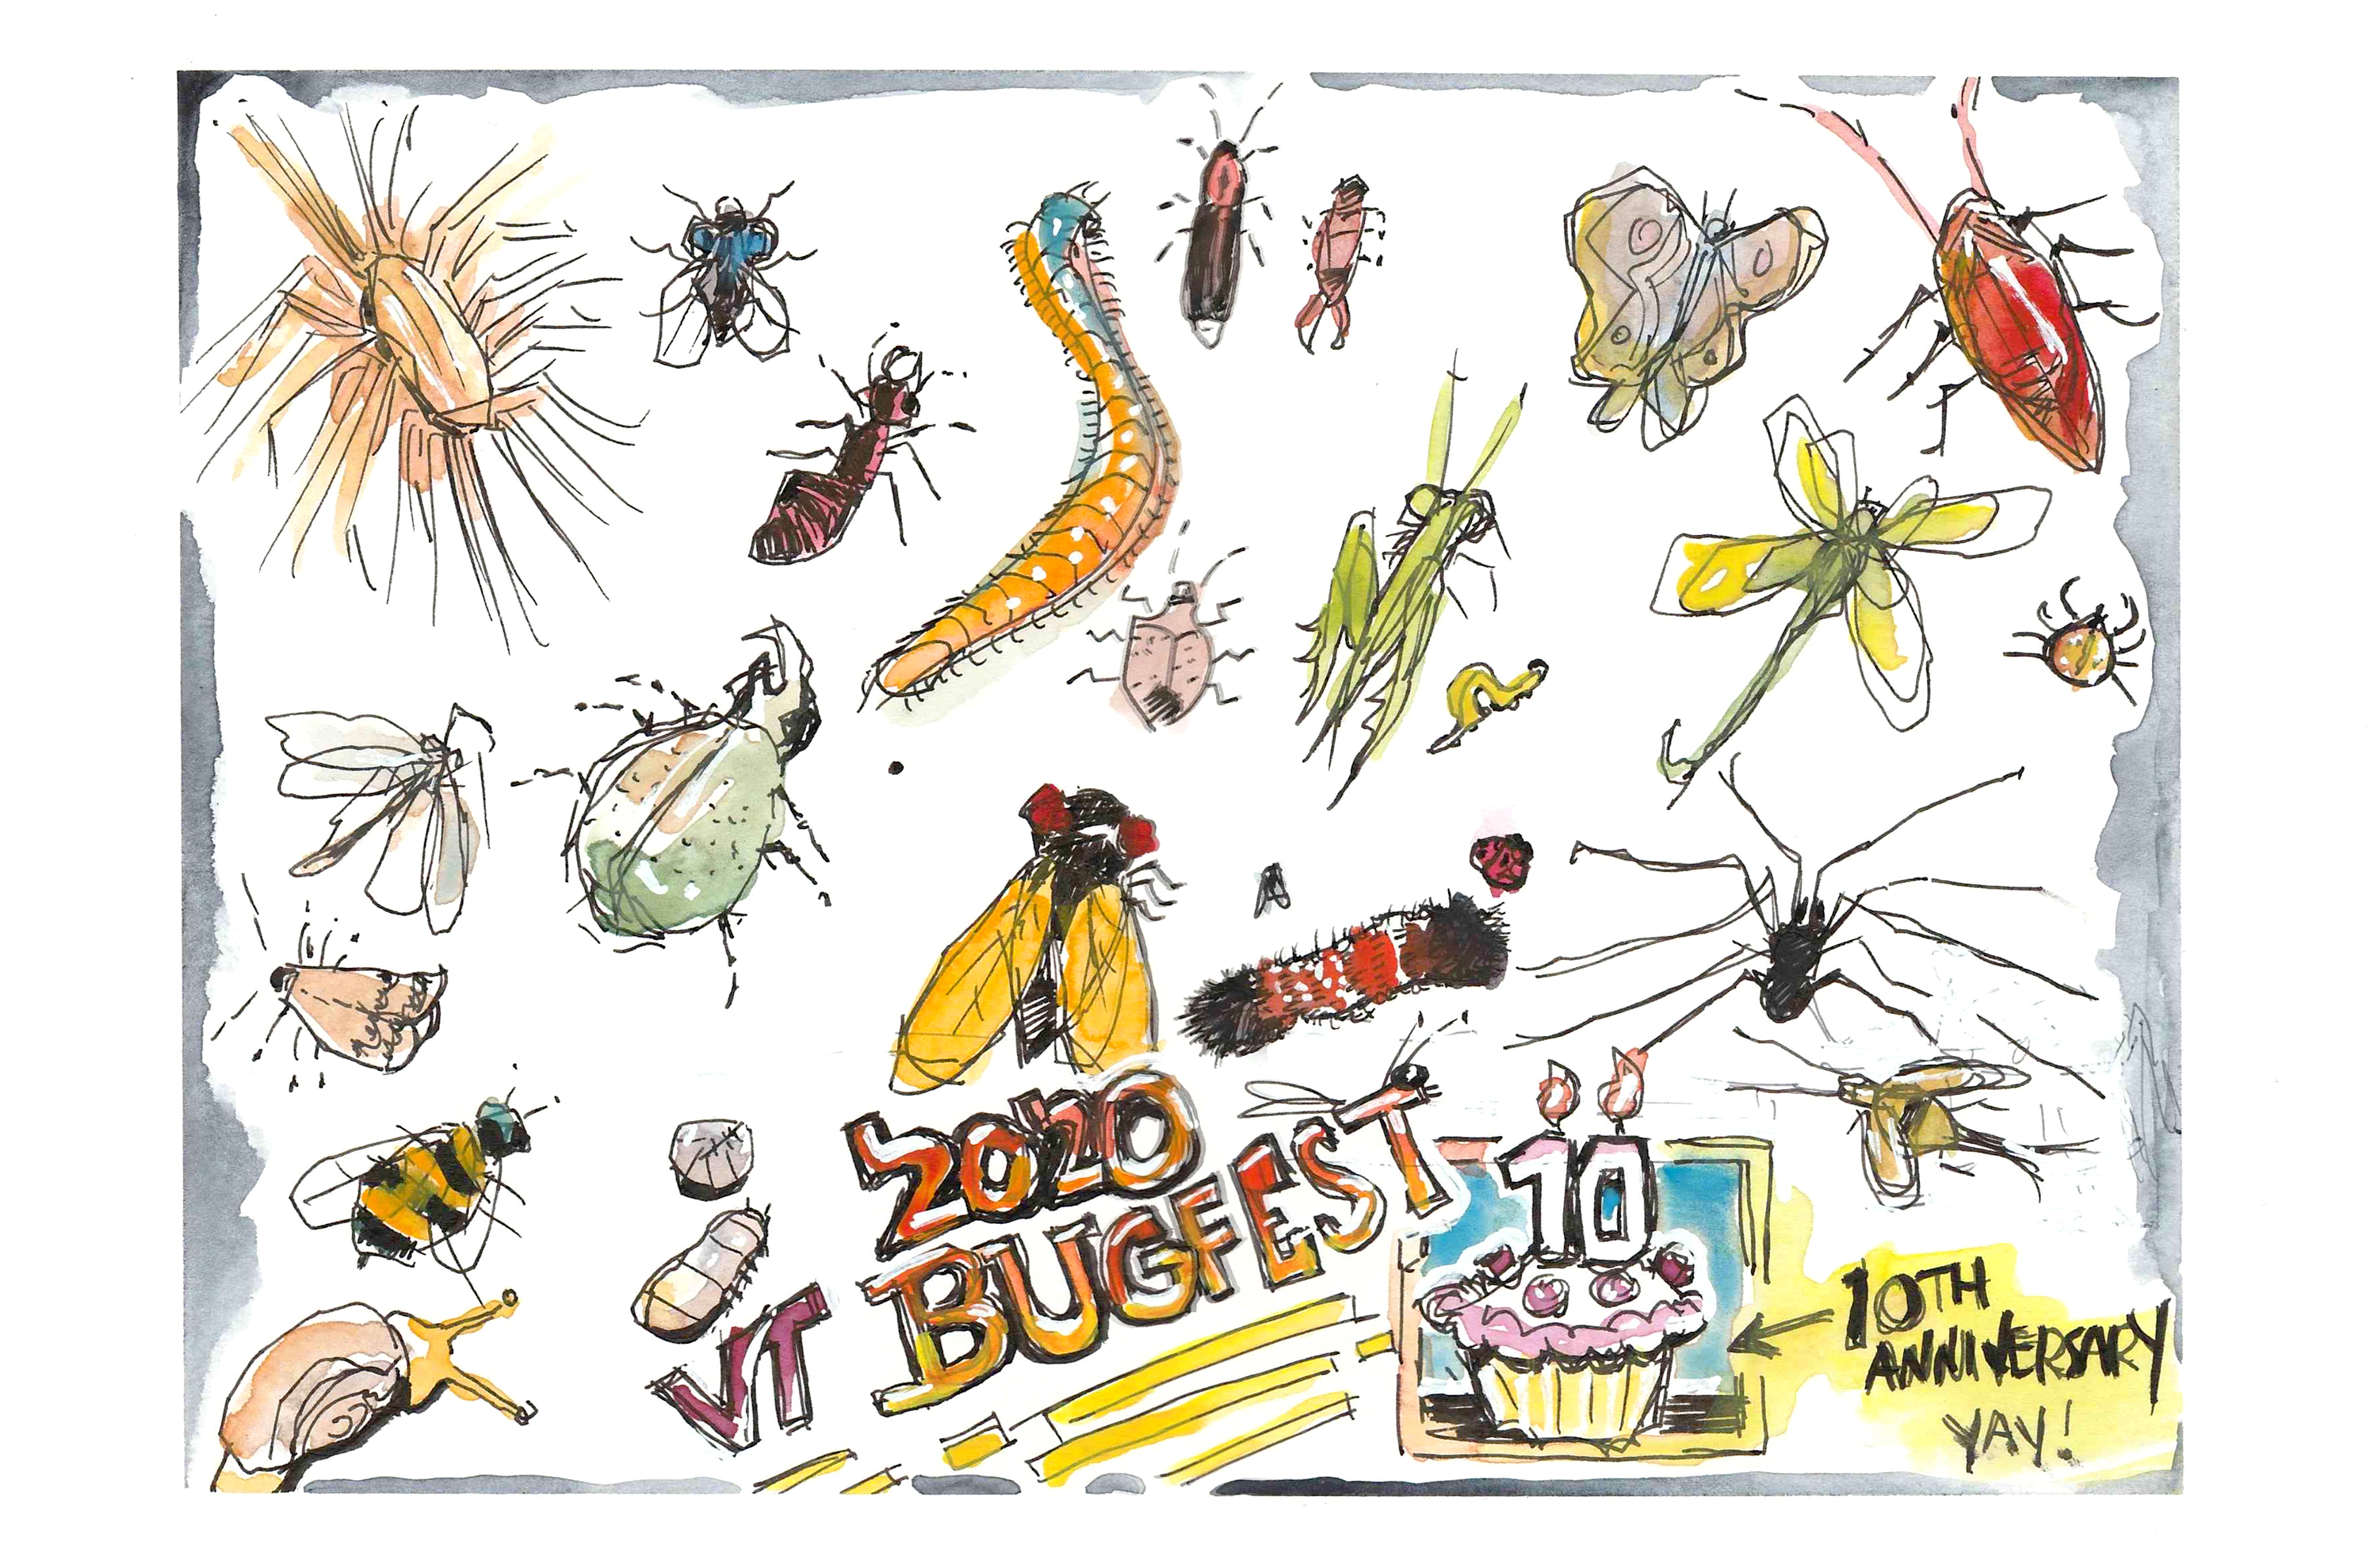 2020 Virginia Tech Bugfest -- Appeared on Oct. 13, 2020